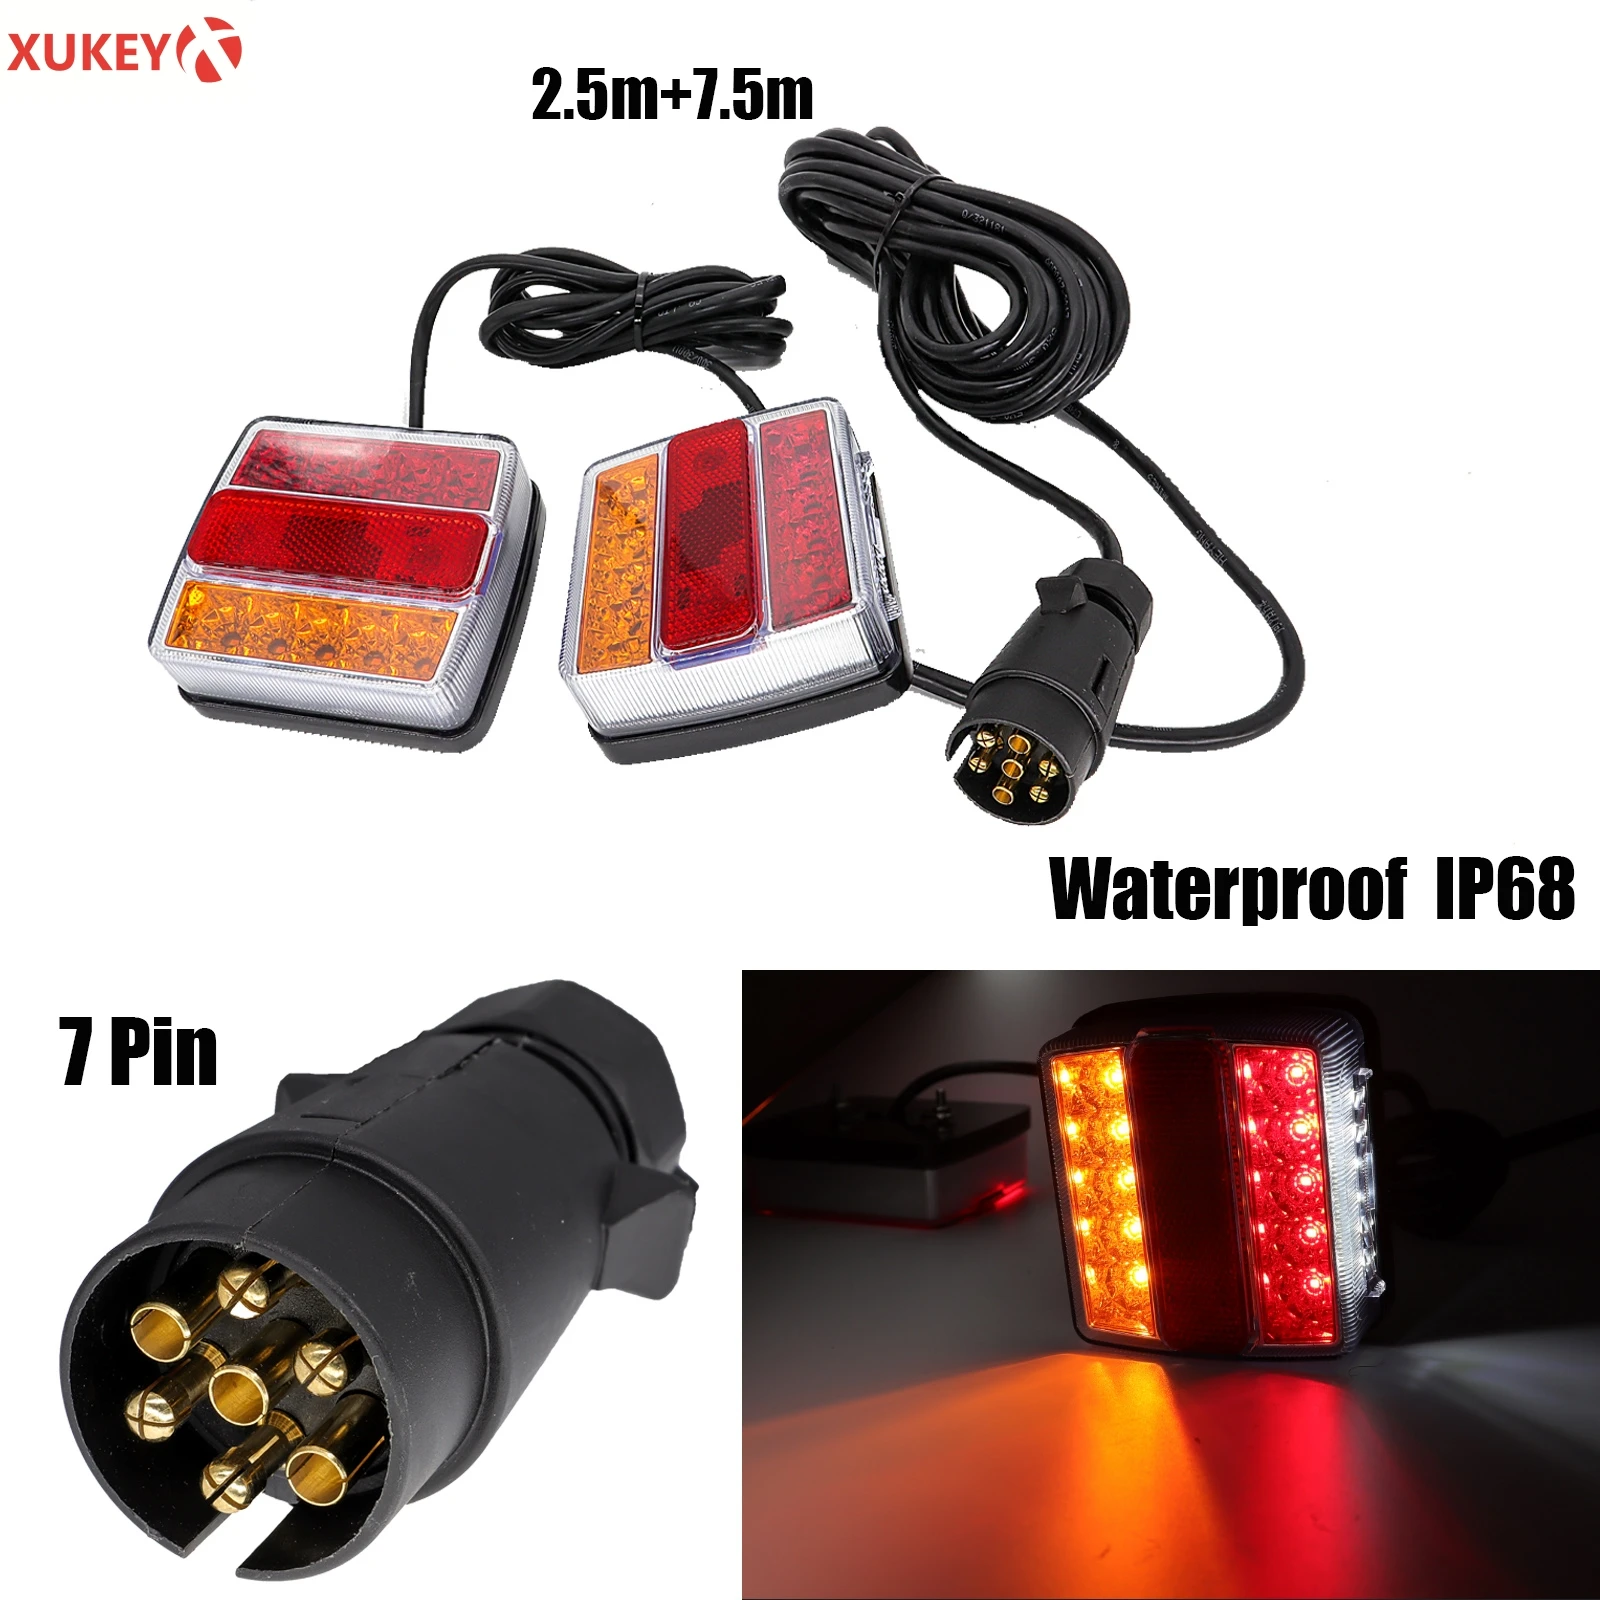 1 Set 10m 7 Pin Plug 12V 16 Led Trailer Towing Light Kit Rear Stop Tail Turn Signal Lights License Number Plate Lamp Truck RV g40 outdoor string lights e12 socket 25ft 65ft tp44 frosted led light bulb connectable us eu plug fairy light chain for wedding